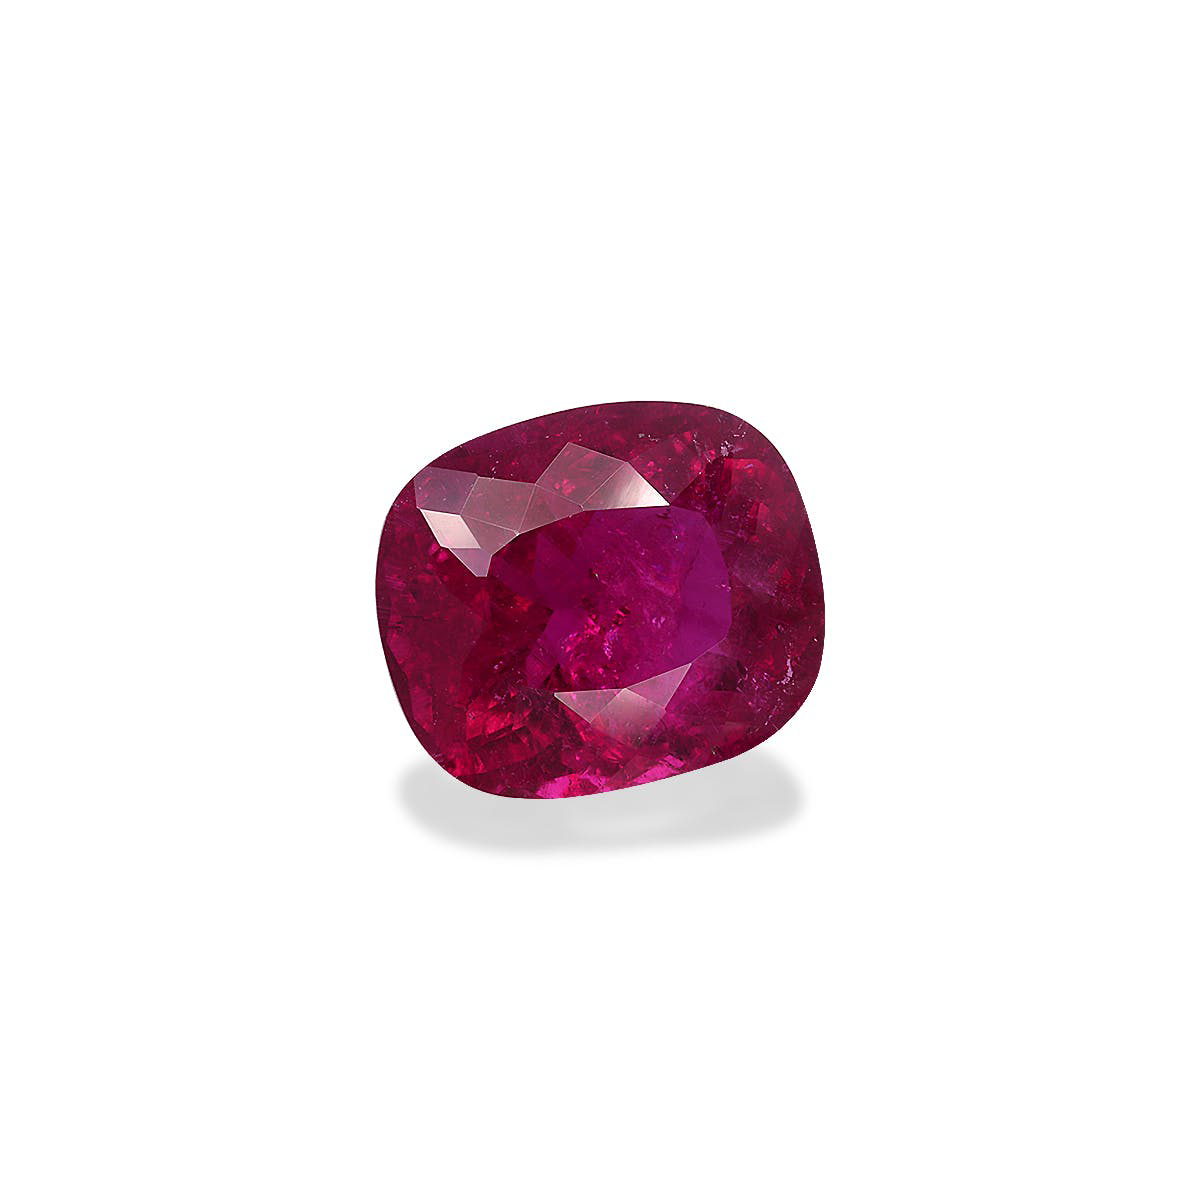 Picture of Red Rubellite Tourmaline 6.82ct - 13x11mm (RL0849)